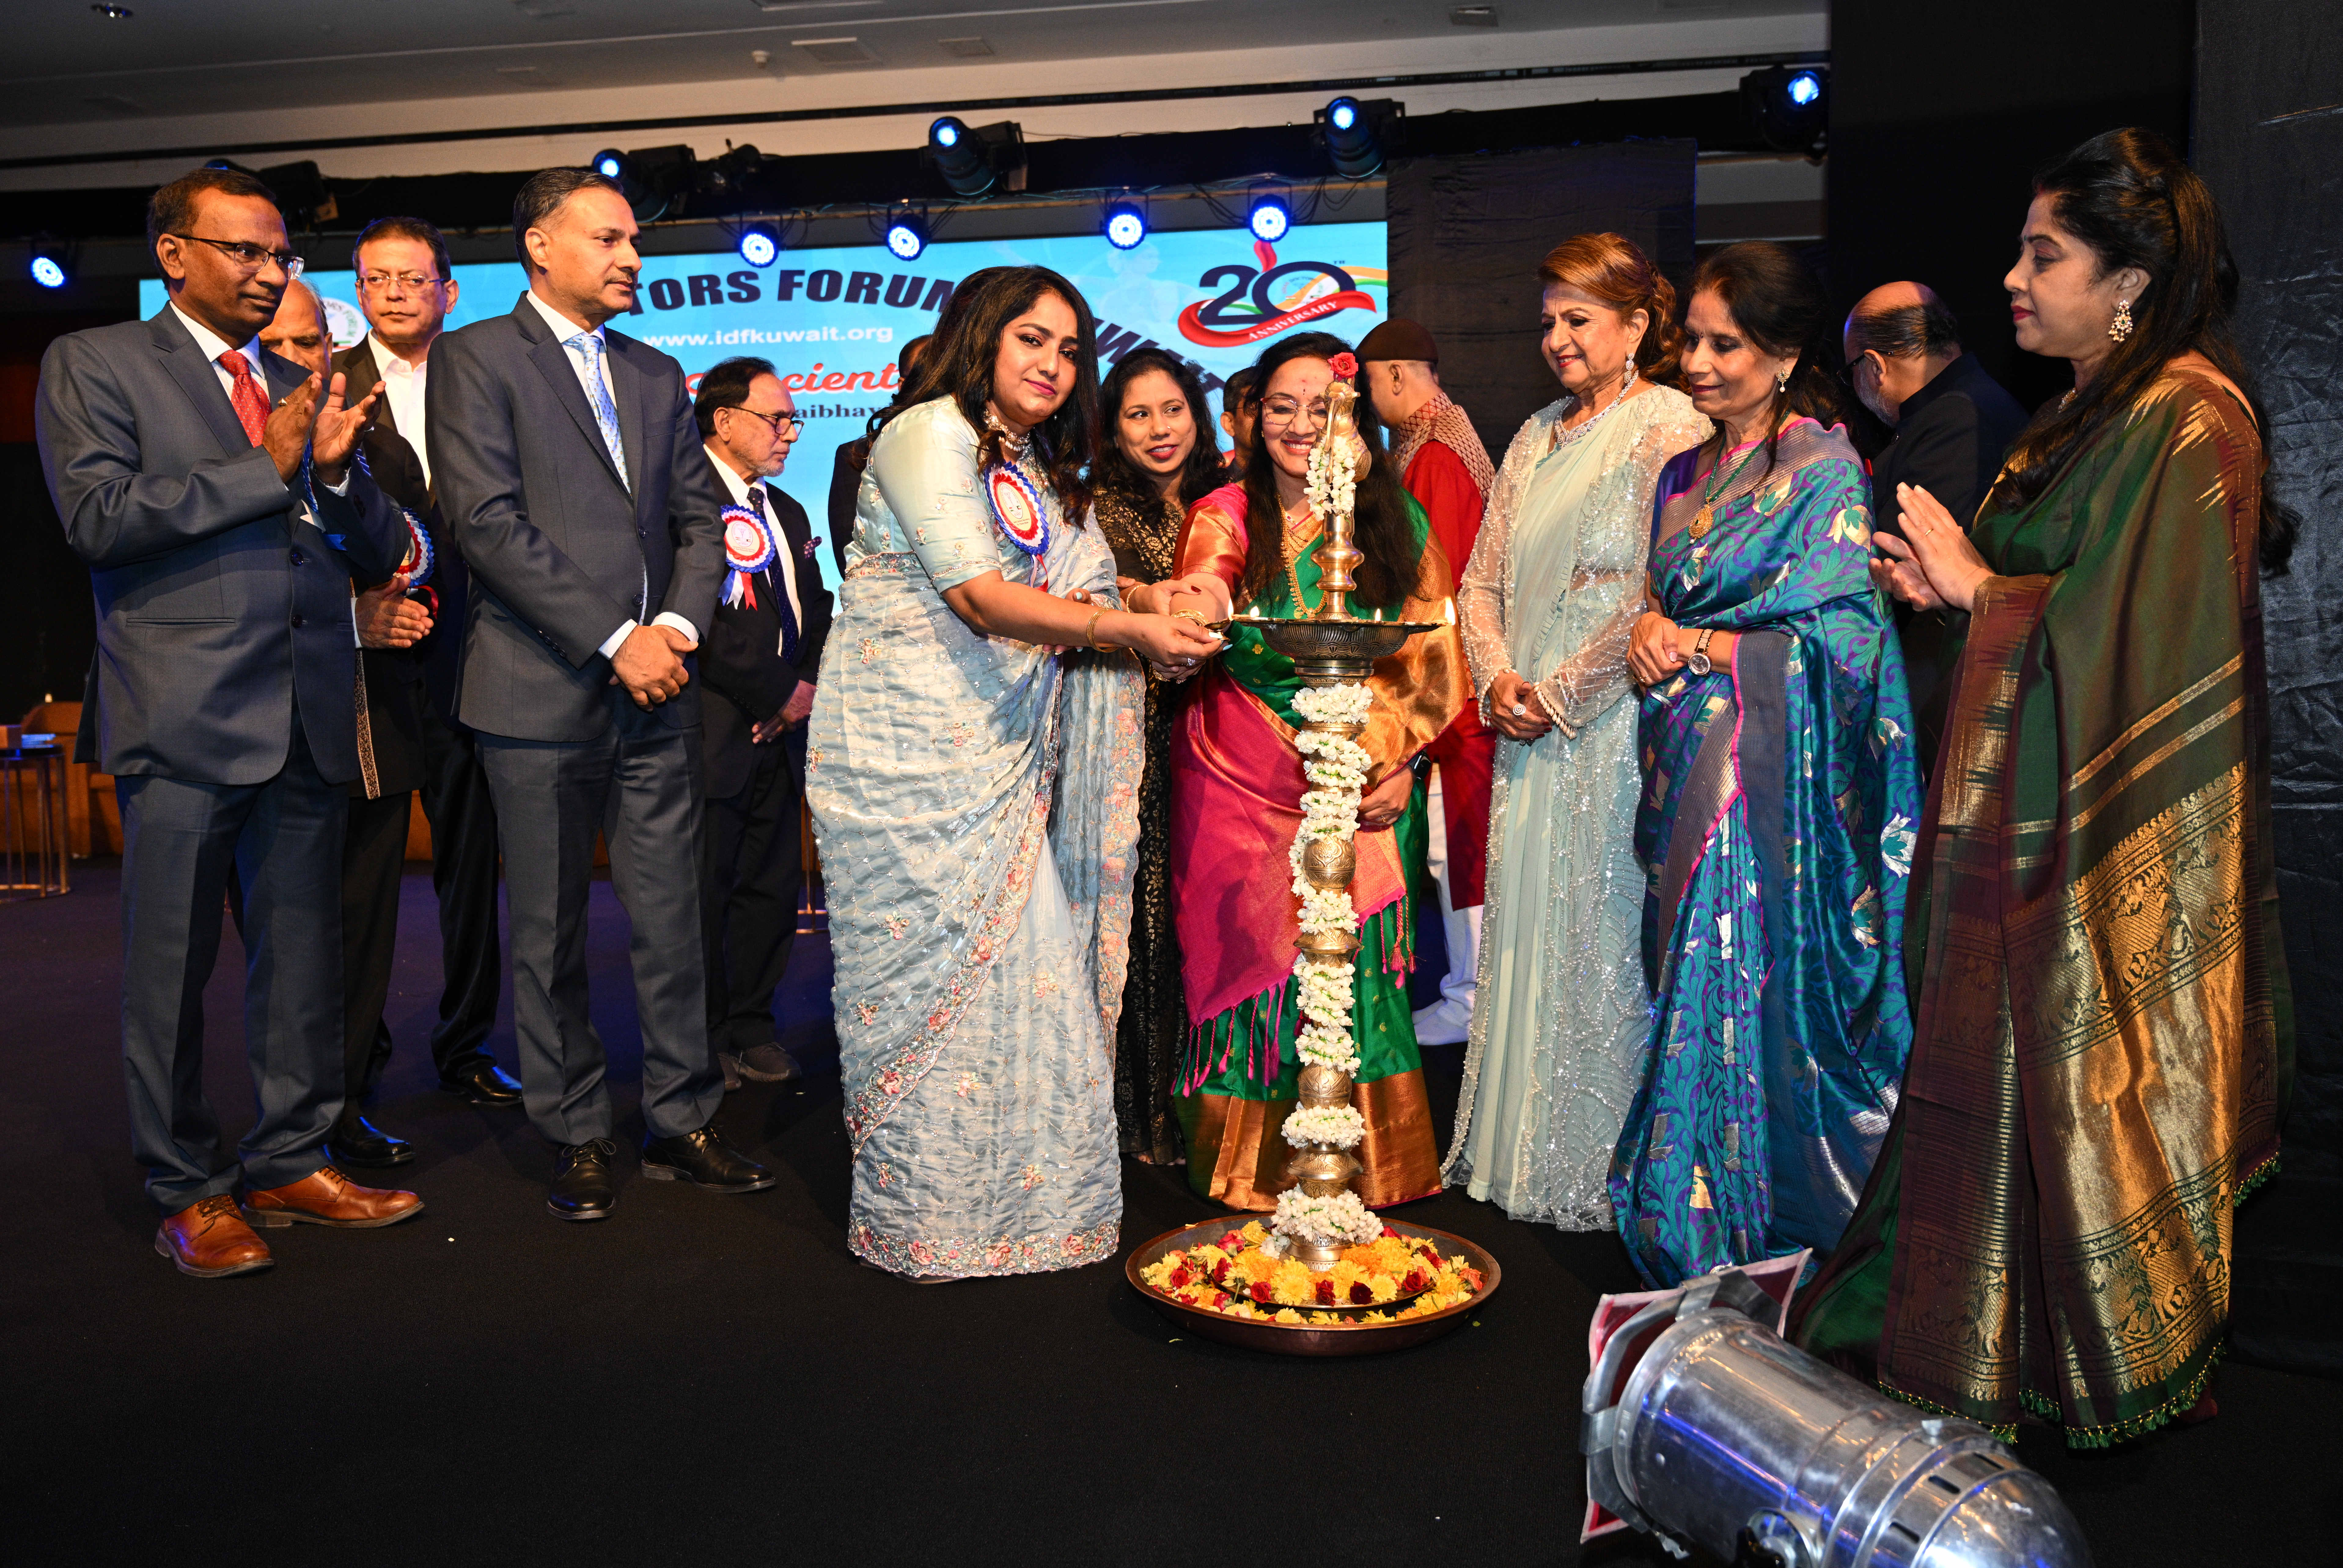 Indian Doctors Forum Celebrates Glorious 20th Anniversary, Indians in Kuwait